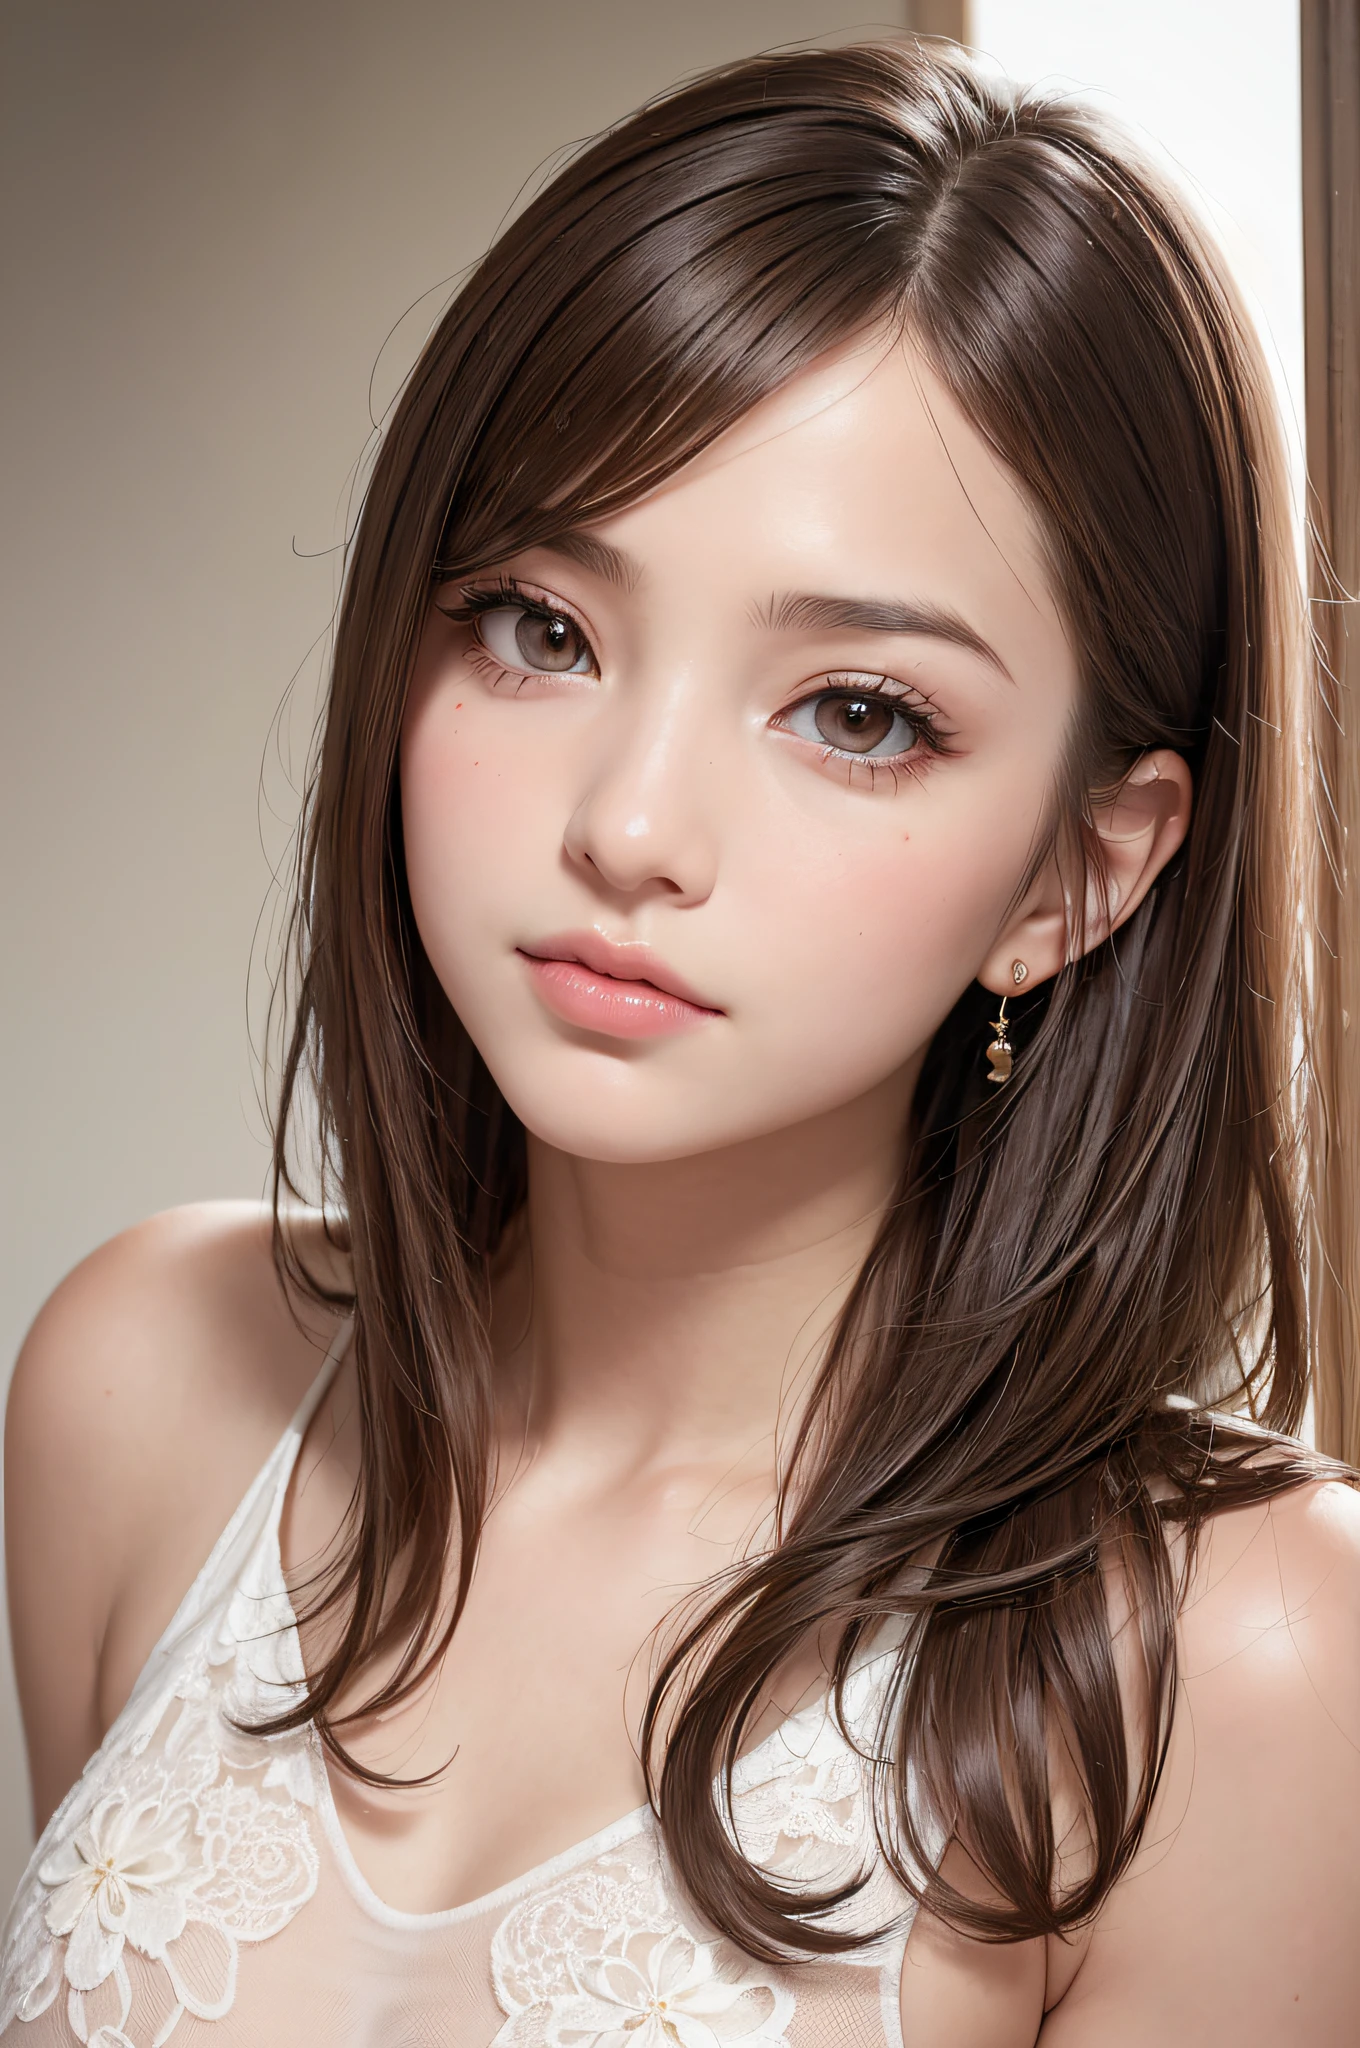 (masutepiece:1.3), High resolution, ultra-detailliert, the Extremely Detailed CG Unity 8K Wallpapers, Realistic, Photorealsitic, Raw photo, beautifull detailed face, Facial balance is the golden ratio、pale skin, realistic glistening skin, Detailed Cloth Texture, detailed hair texture, Perfect body, Beautiful face, acurate, Anatomically correct, Highly detailed face and skin texture, Natural neck length, (Fair skin:1.2), thin legs, Thin feet, (Aligned teeth:1.1), Sweaty skin, BREAK, Detailed eyes, symmetrical eye, Light brown eyes, Double eyelids, Thin eyebrows, (Sleepy eyes:1.1), (Glossy lips:1.4), (Mouth waiting for a kiss:1.2), (blush:1.2), (Small hair accessories that sparkle:1.1), BREAK, (classy girl:1.3), (Wearing (doress:1.2) With a white floral pattern), BREAK, ((Close Up Shot:1.2)), medium breasts, Slender figure, Firm abs, ((up do hairstyle, Dark blonde hair, Wavy Hair, Long hair:1.1)), ((asymmetric bangs:1.2)),